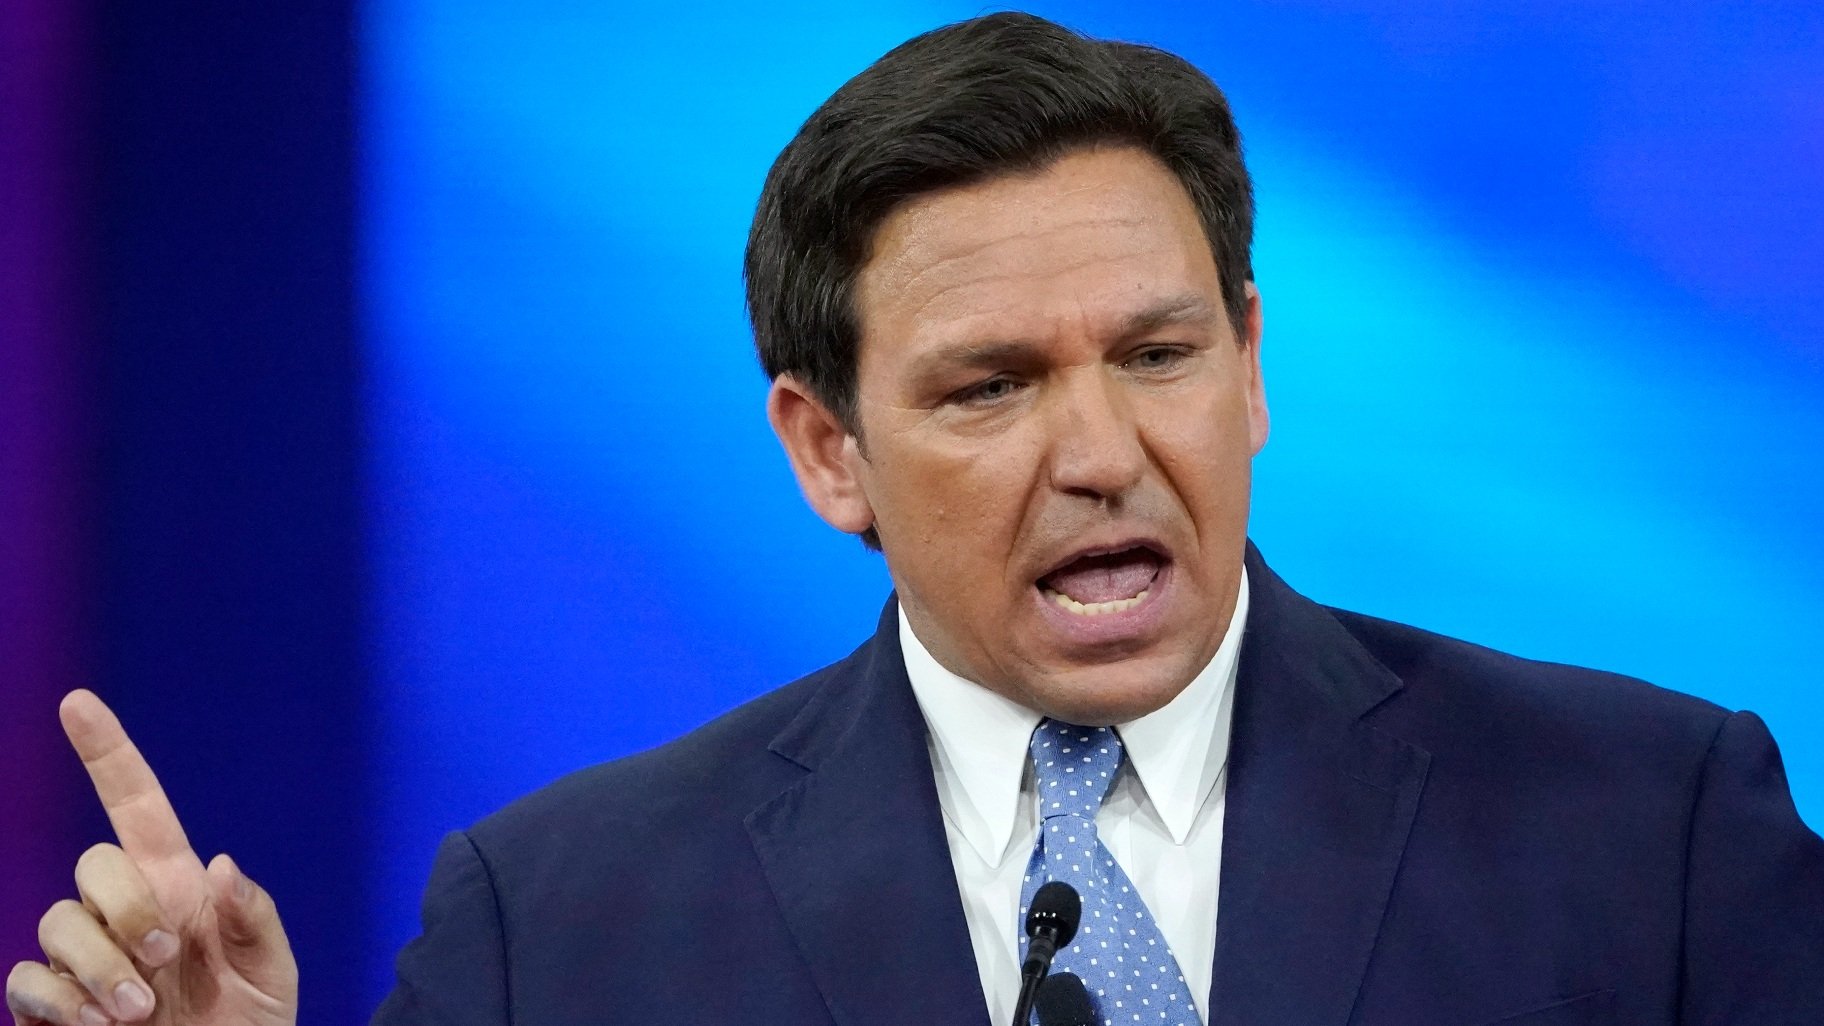 Florida Governor Ron DeSantis officially launches 2024 presidential campaign to challenge Donald Trump |  Chicago News